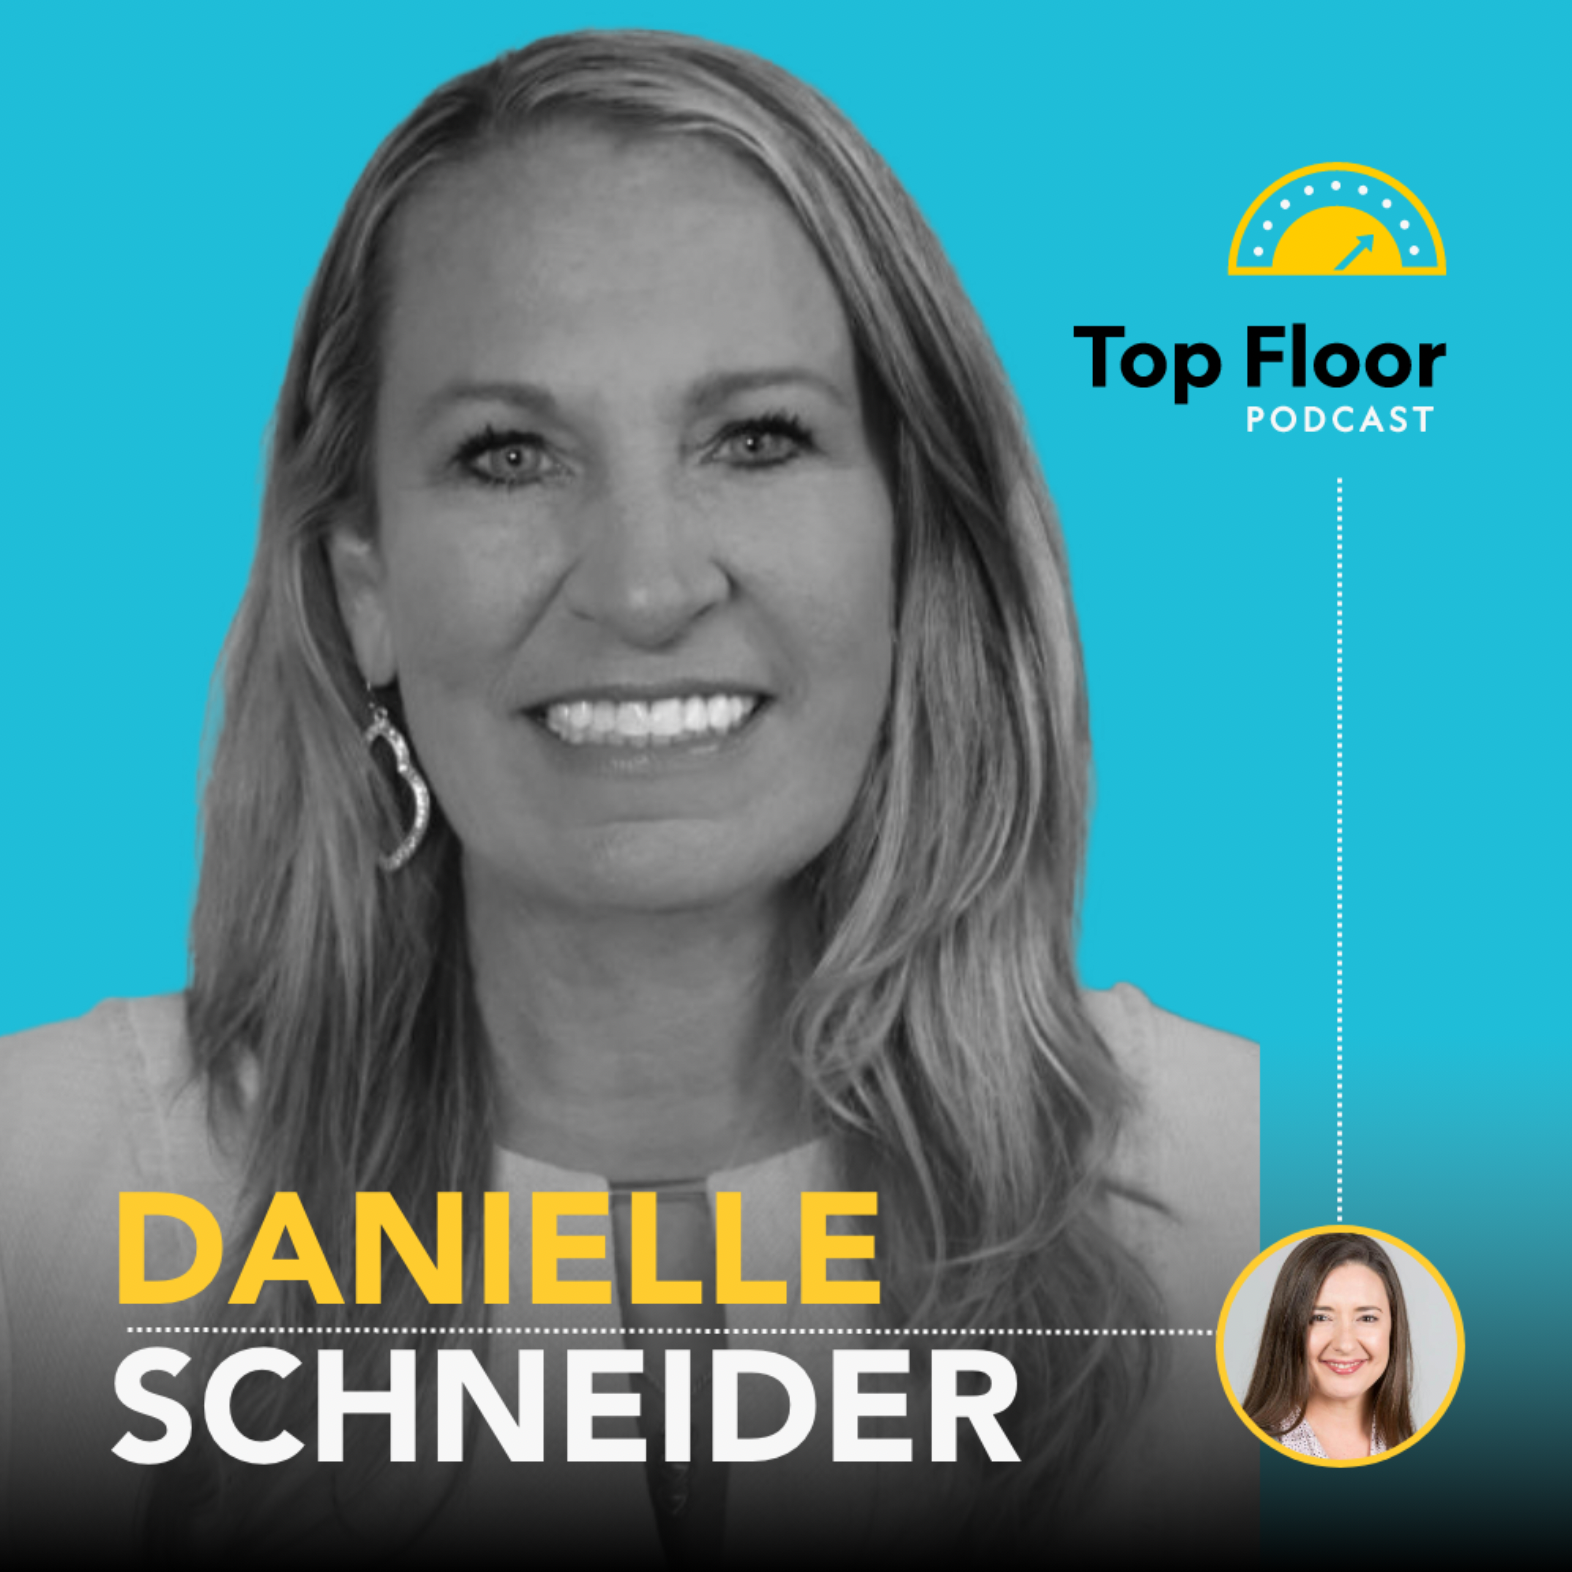 Danielle Schneider of Pathfinder Hospitality joins the Top Floor Podcast